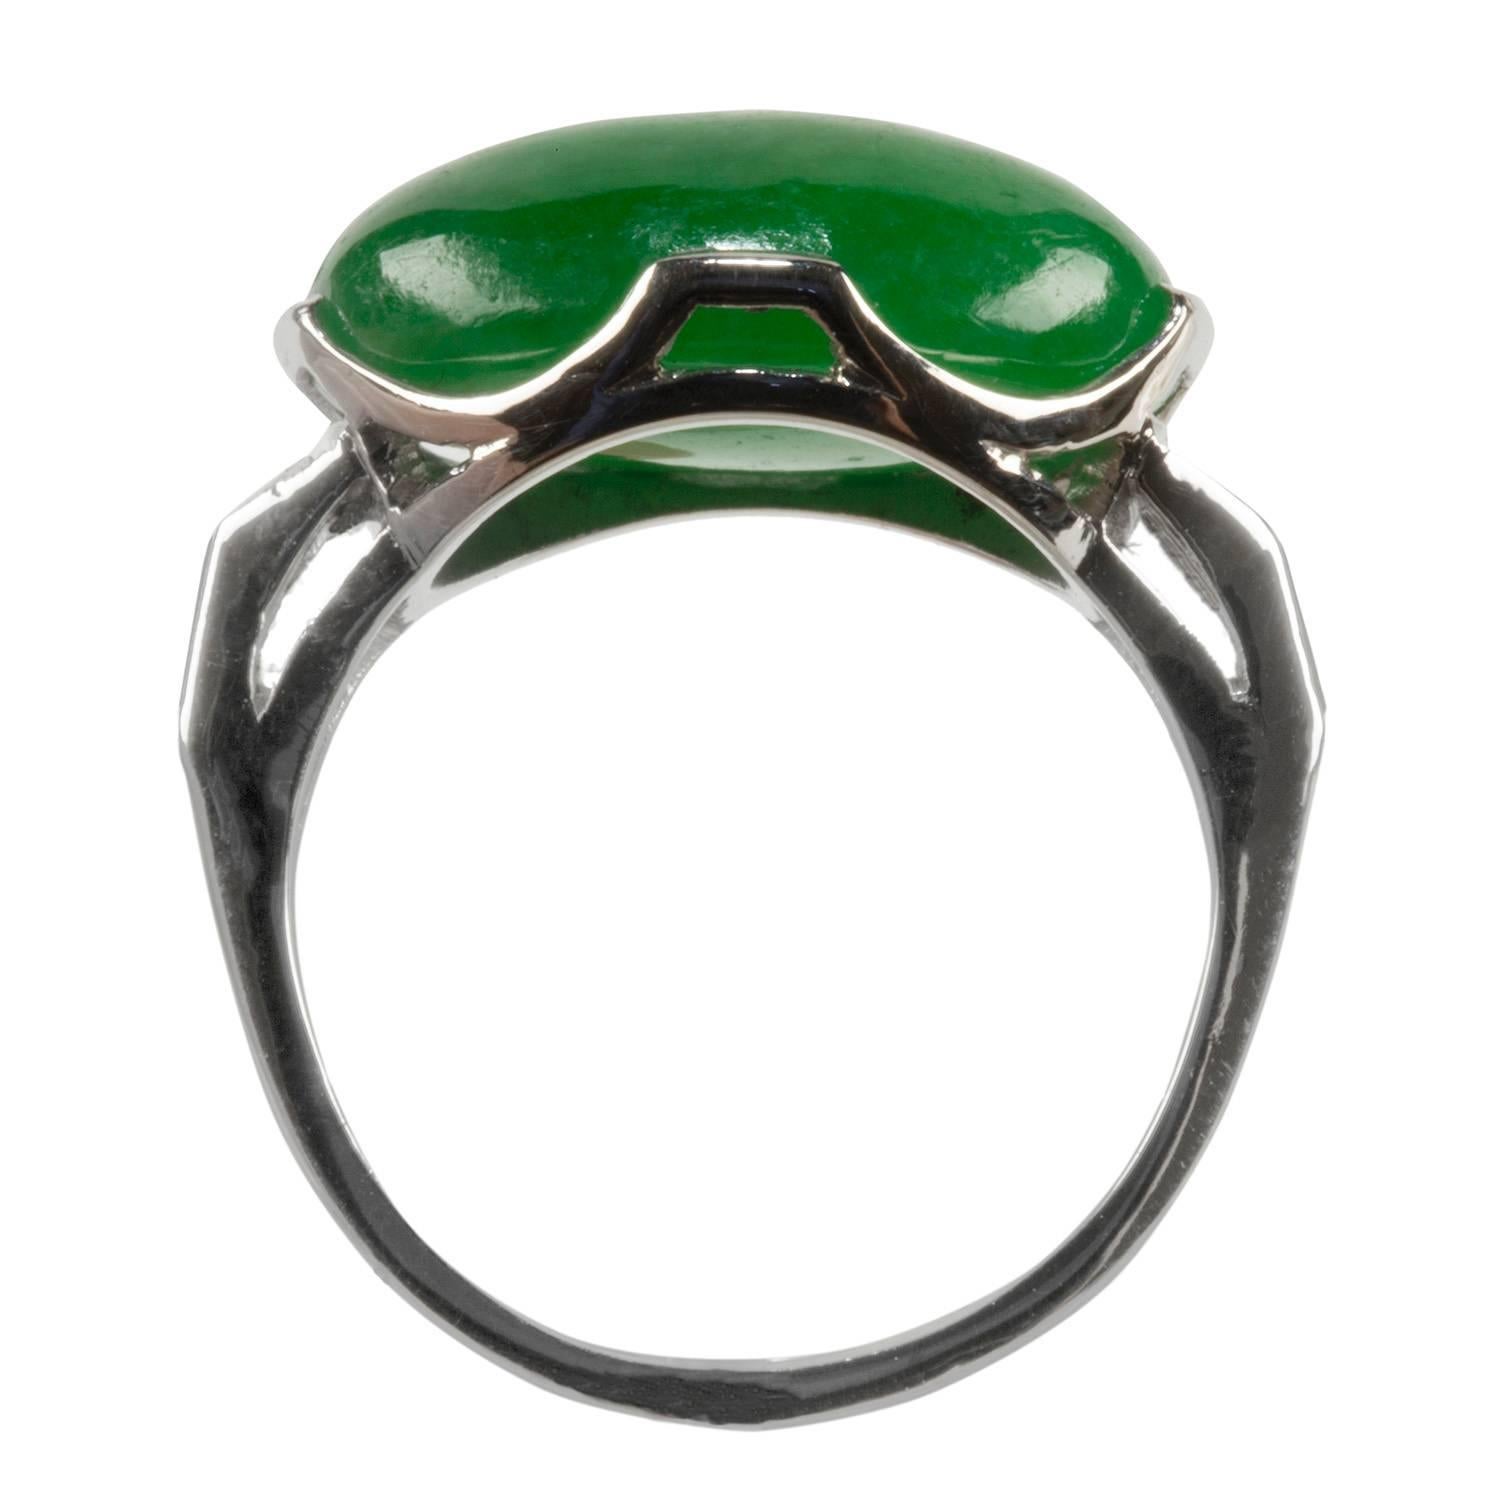 This beautiful jade and diamond ring is set in platinum flanked with baguette cut diamonds.  The natural jadeite jade has an AGL certificate.  There is no evidence of treatment.  The ring is a size 8, but we can easily resize it.